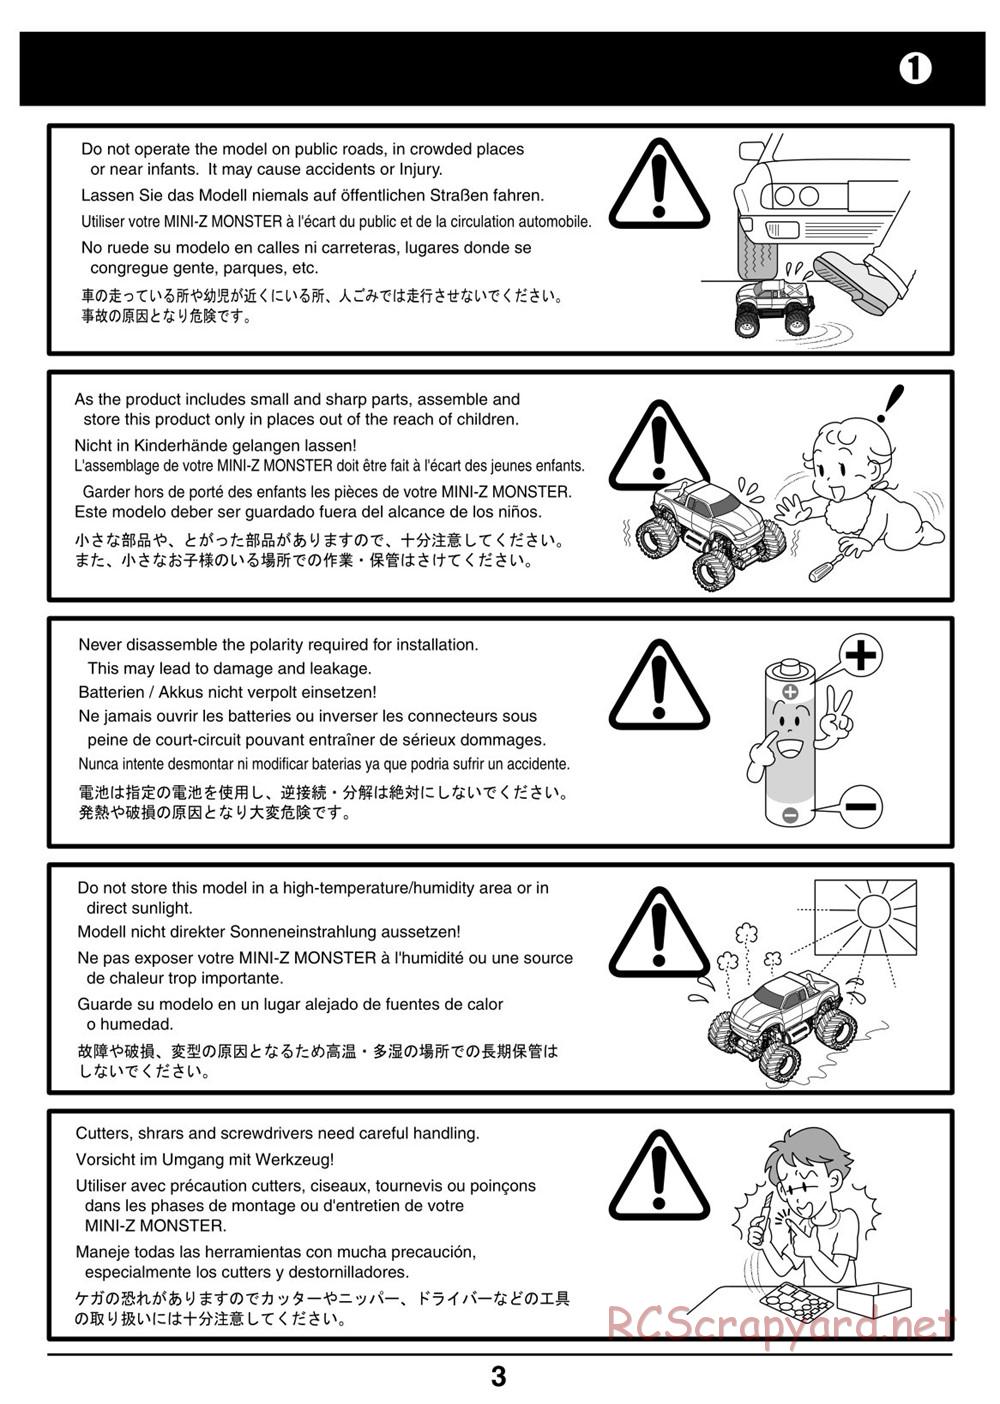 Kyosho - Mini-Z Monster Truck - Manual - Page 3